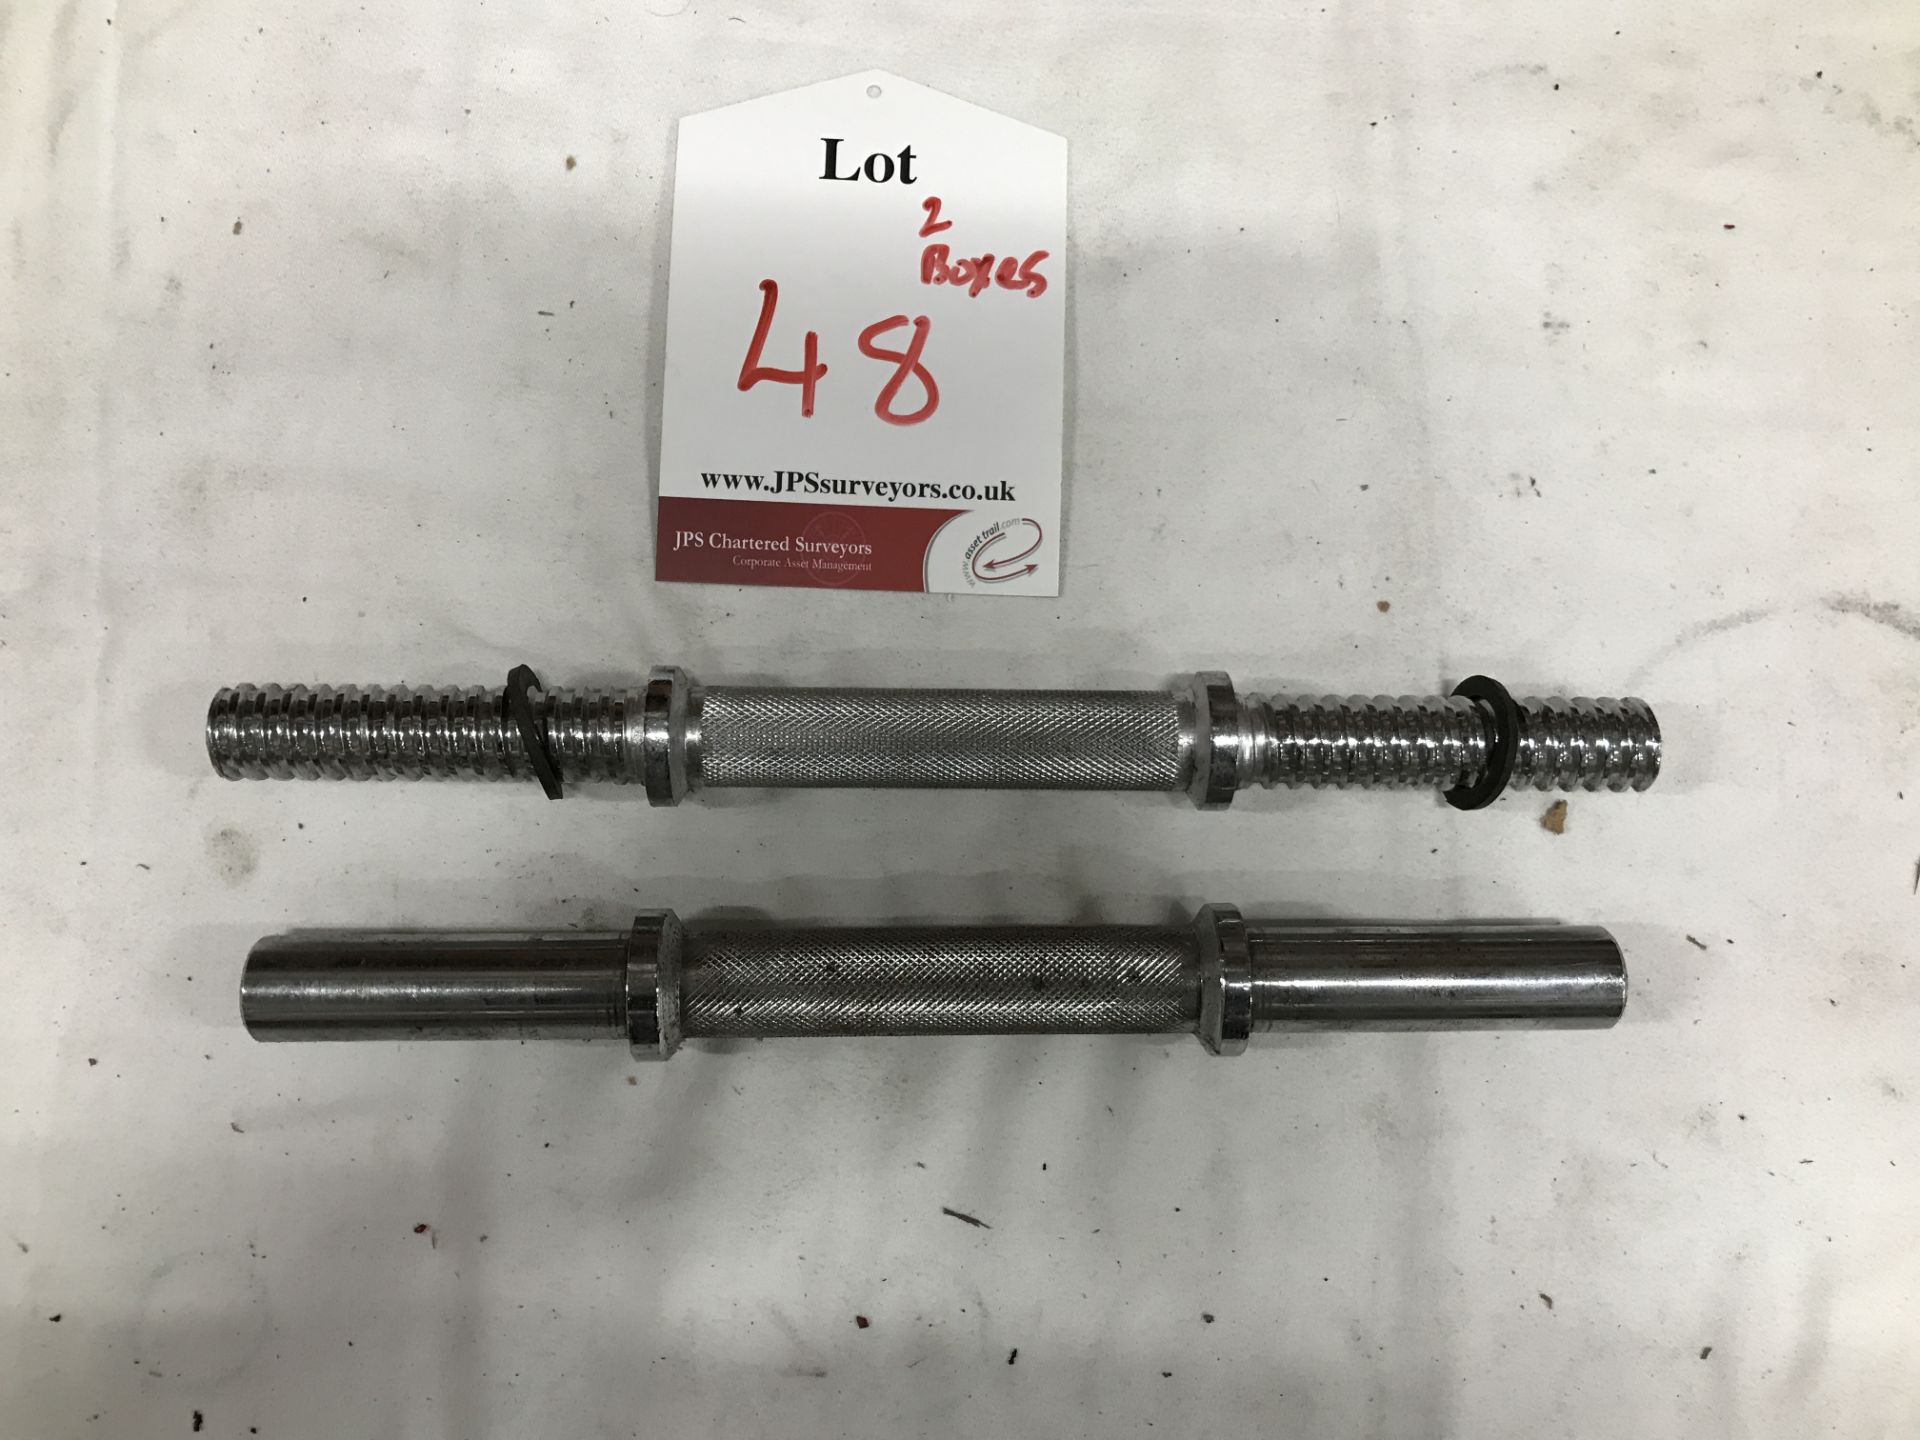 Large Quantity of Spink Lock Steel Dumbell Bars - 2 Boxes